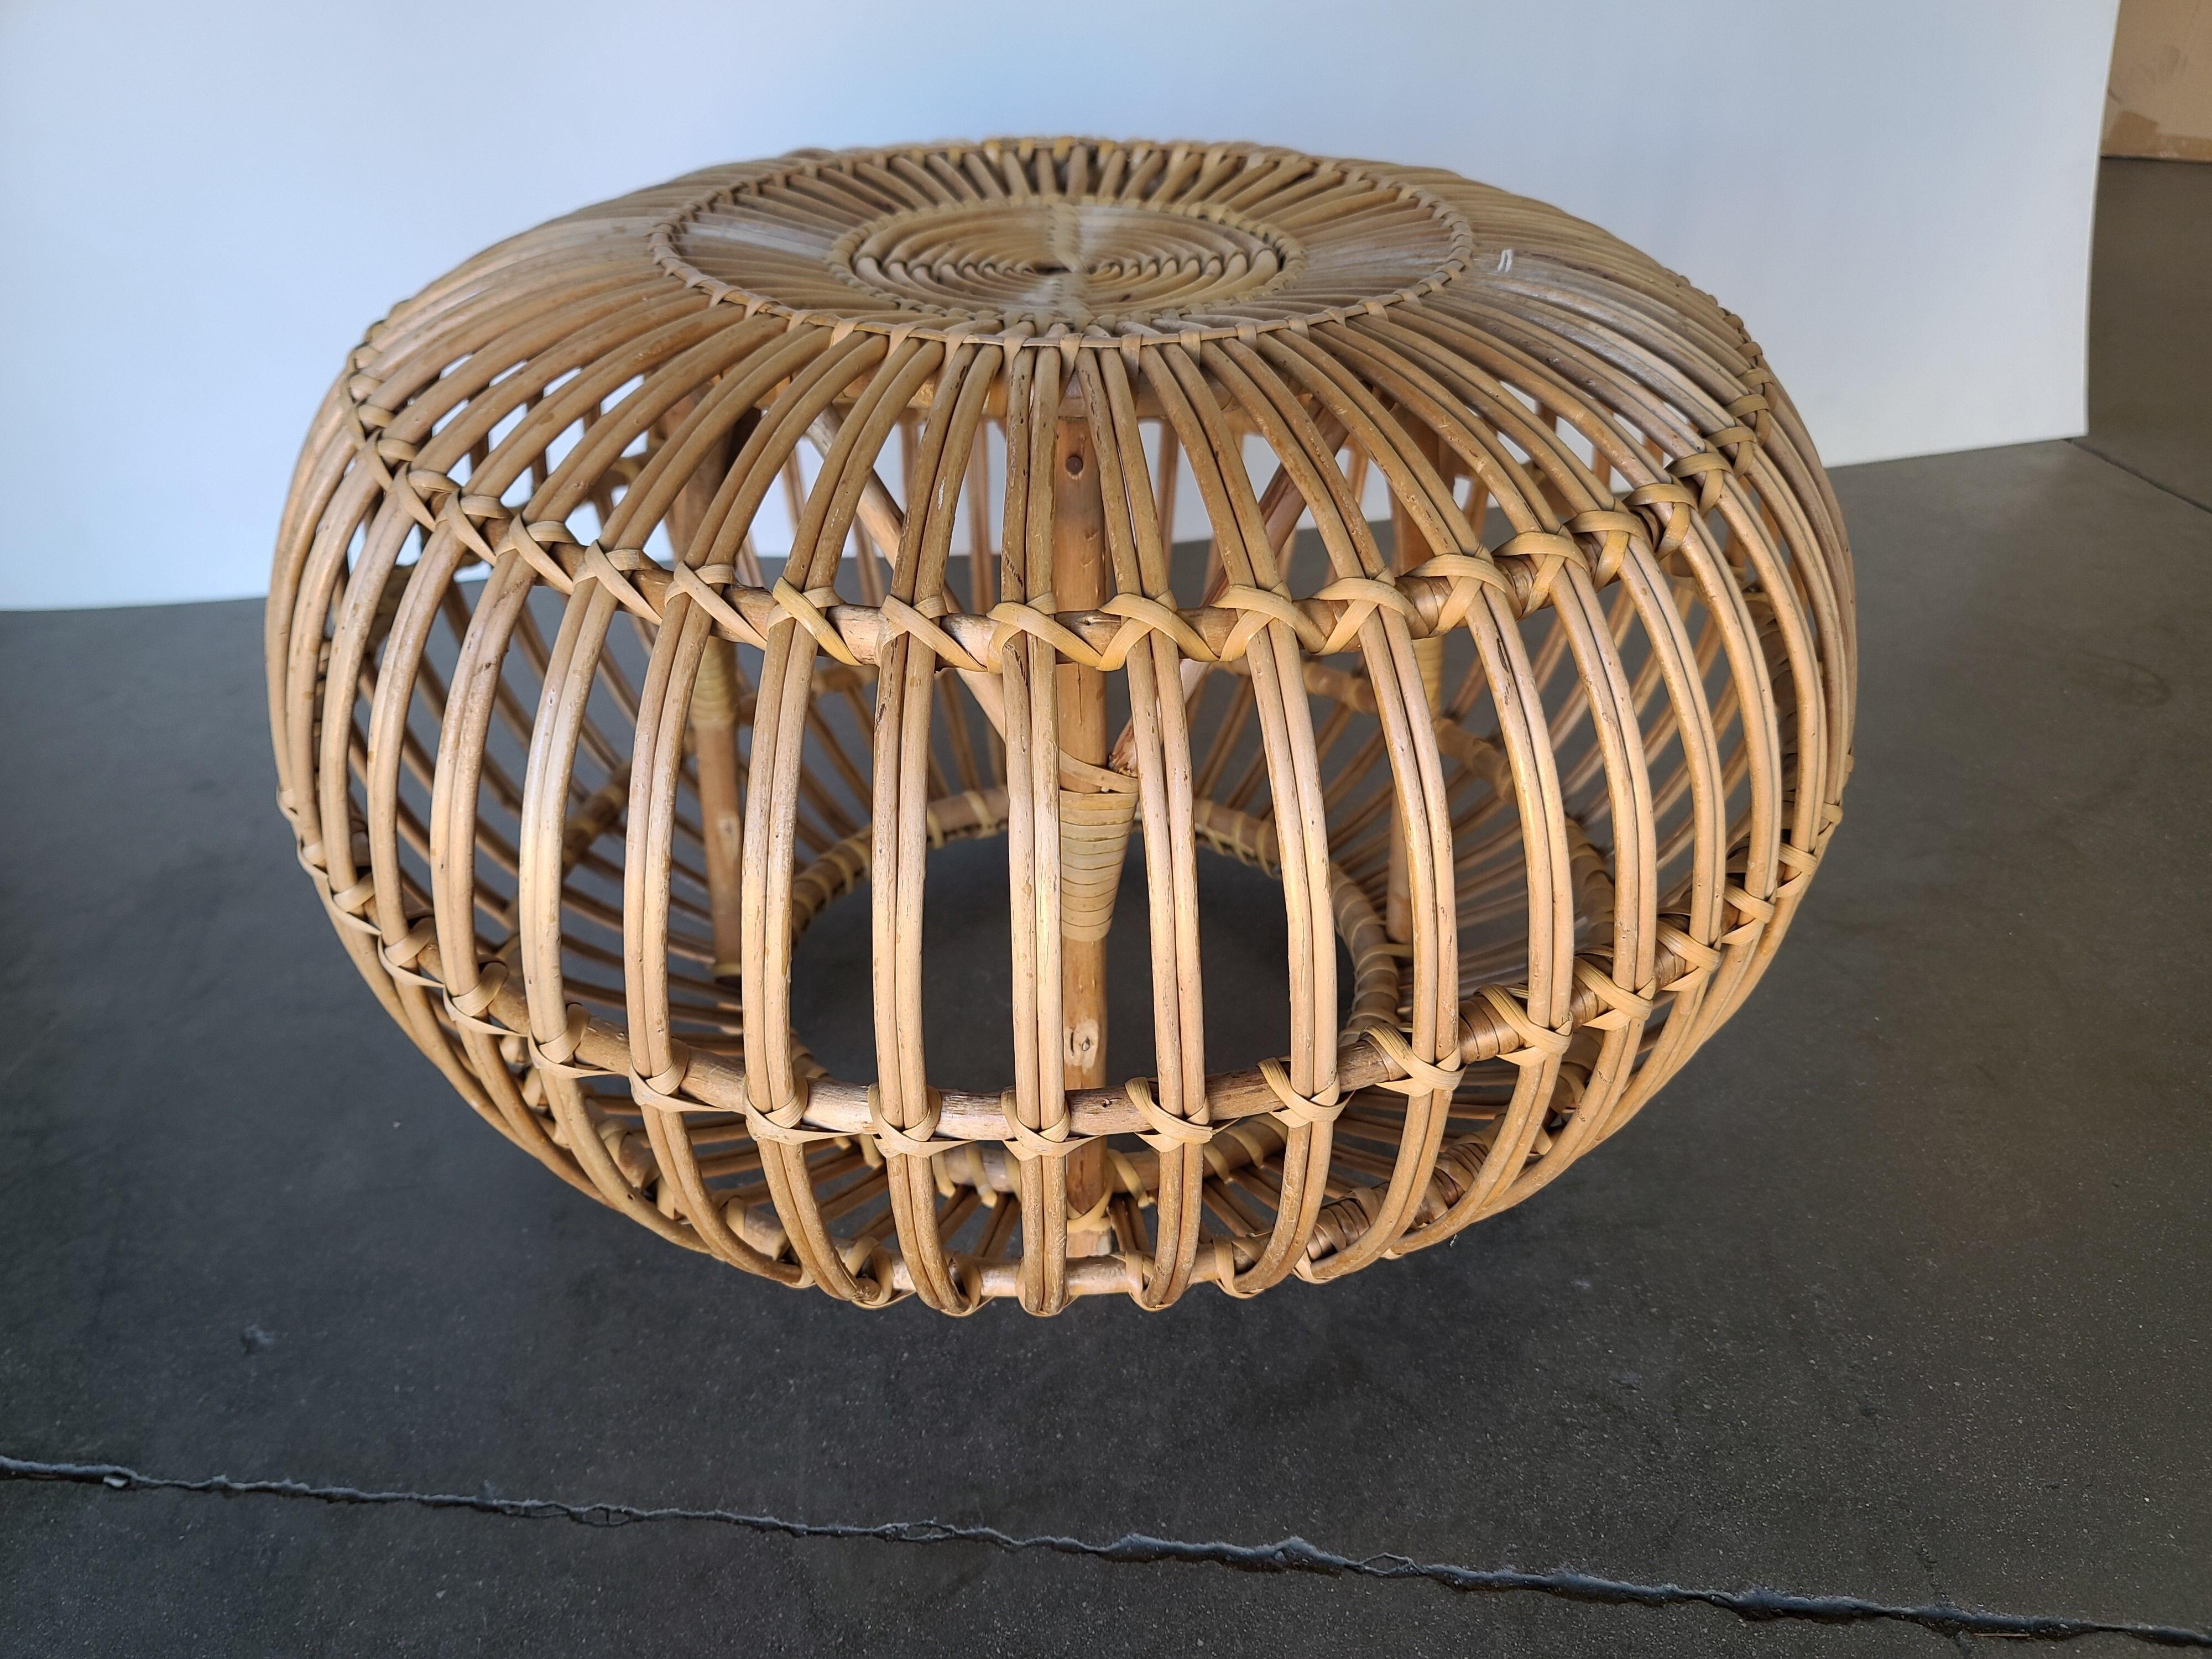 Nice 1960s Franco Albini Round ottoman or sitting stool perfect to complete your bohemian living space.
 
We only purchase and sell only the best and finest rattan furniture made by the best and most well-known American designers and manufacturers